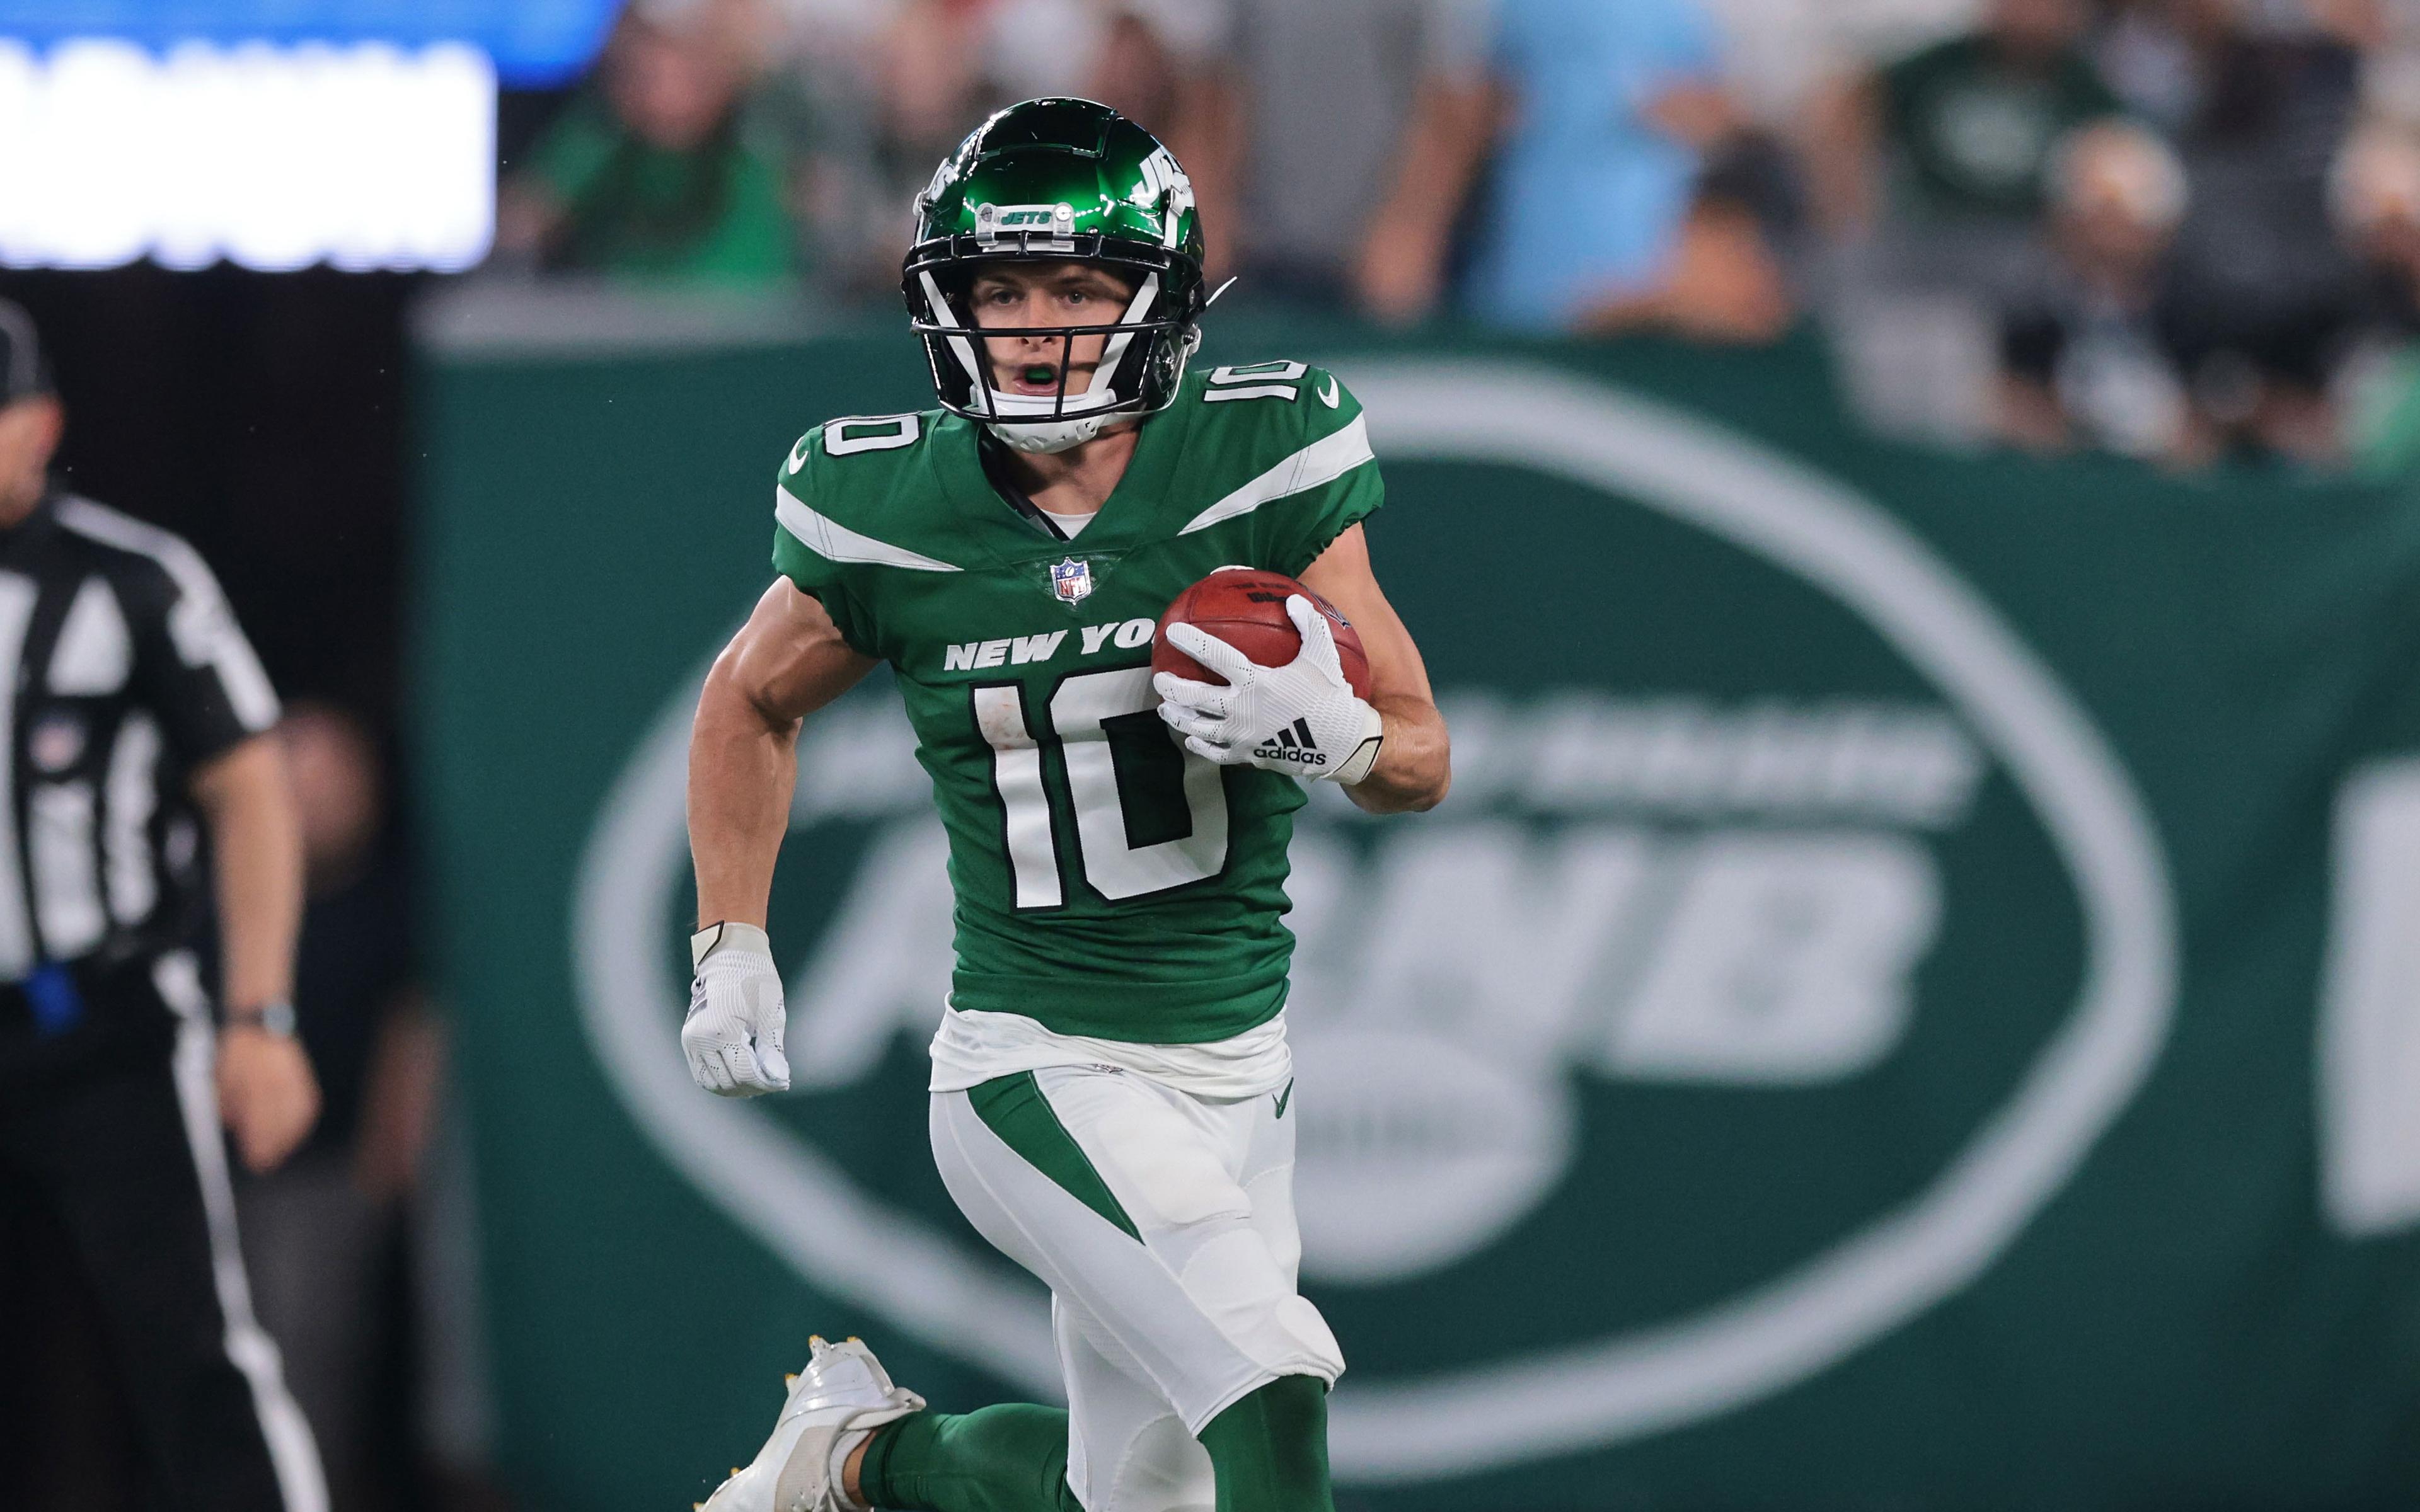 Aug 29, 2021; East Rutherford, New Jersey, USA; New York Jets wide receiver Braxton Berrios (10) against the Philadelphia Eagles during the second half at MetLife Stadium. Mandatory Credit: Vincent Carchietta-USA TODAY Sports / © Vincent Carchietta-USA TODAY Sports